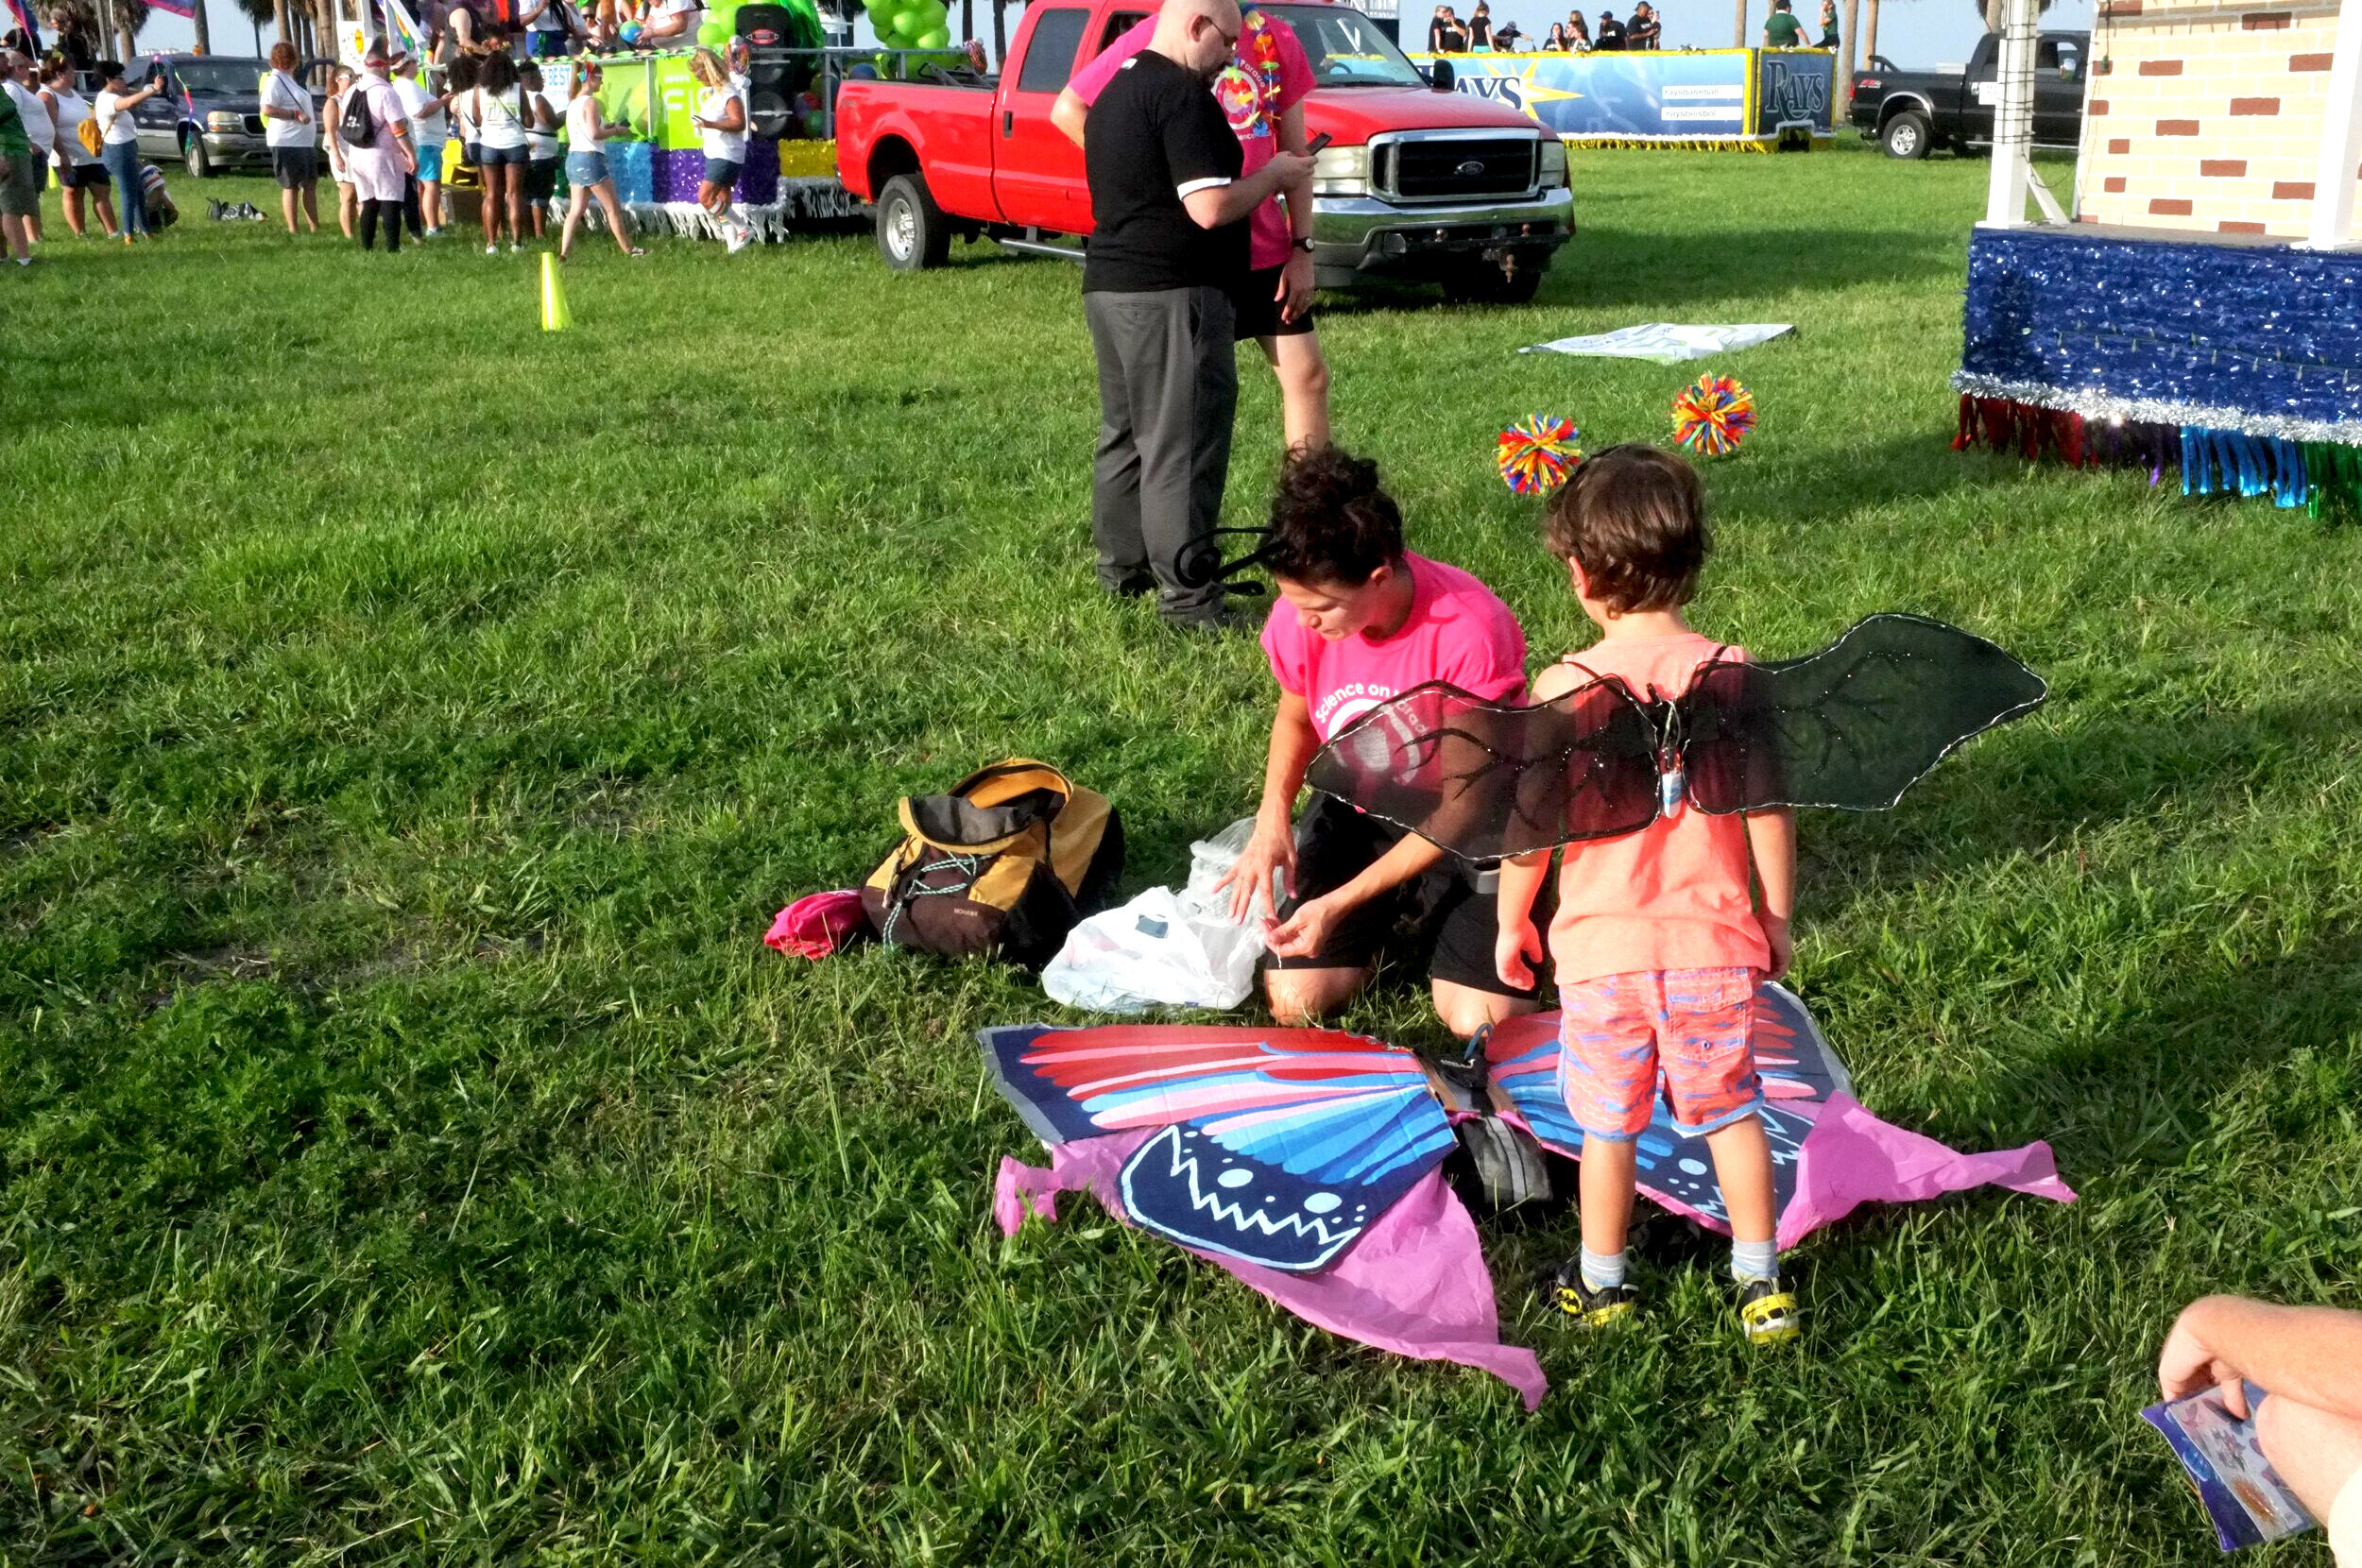  An adult kneeling on the grass preparing wings in the colors of the transgender flag, while a child stands nearby 